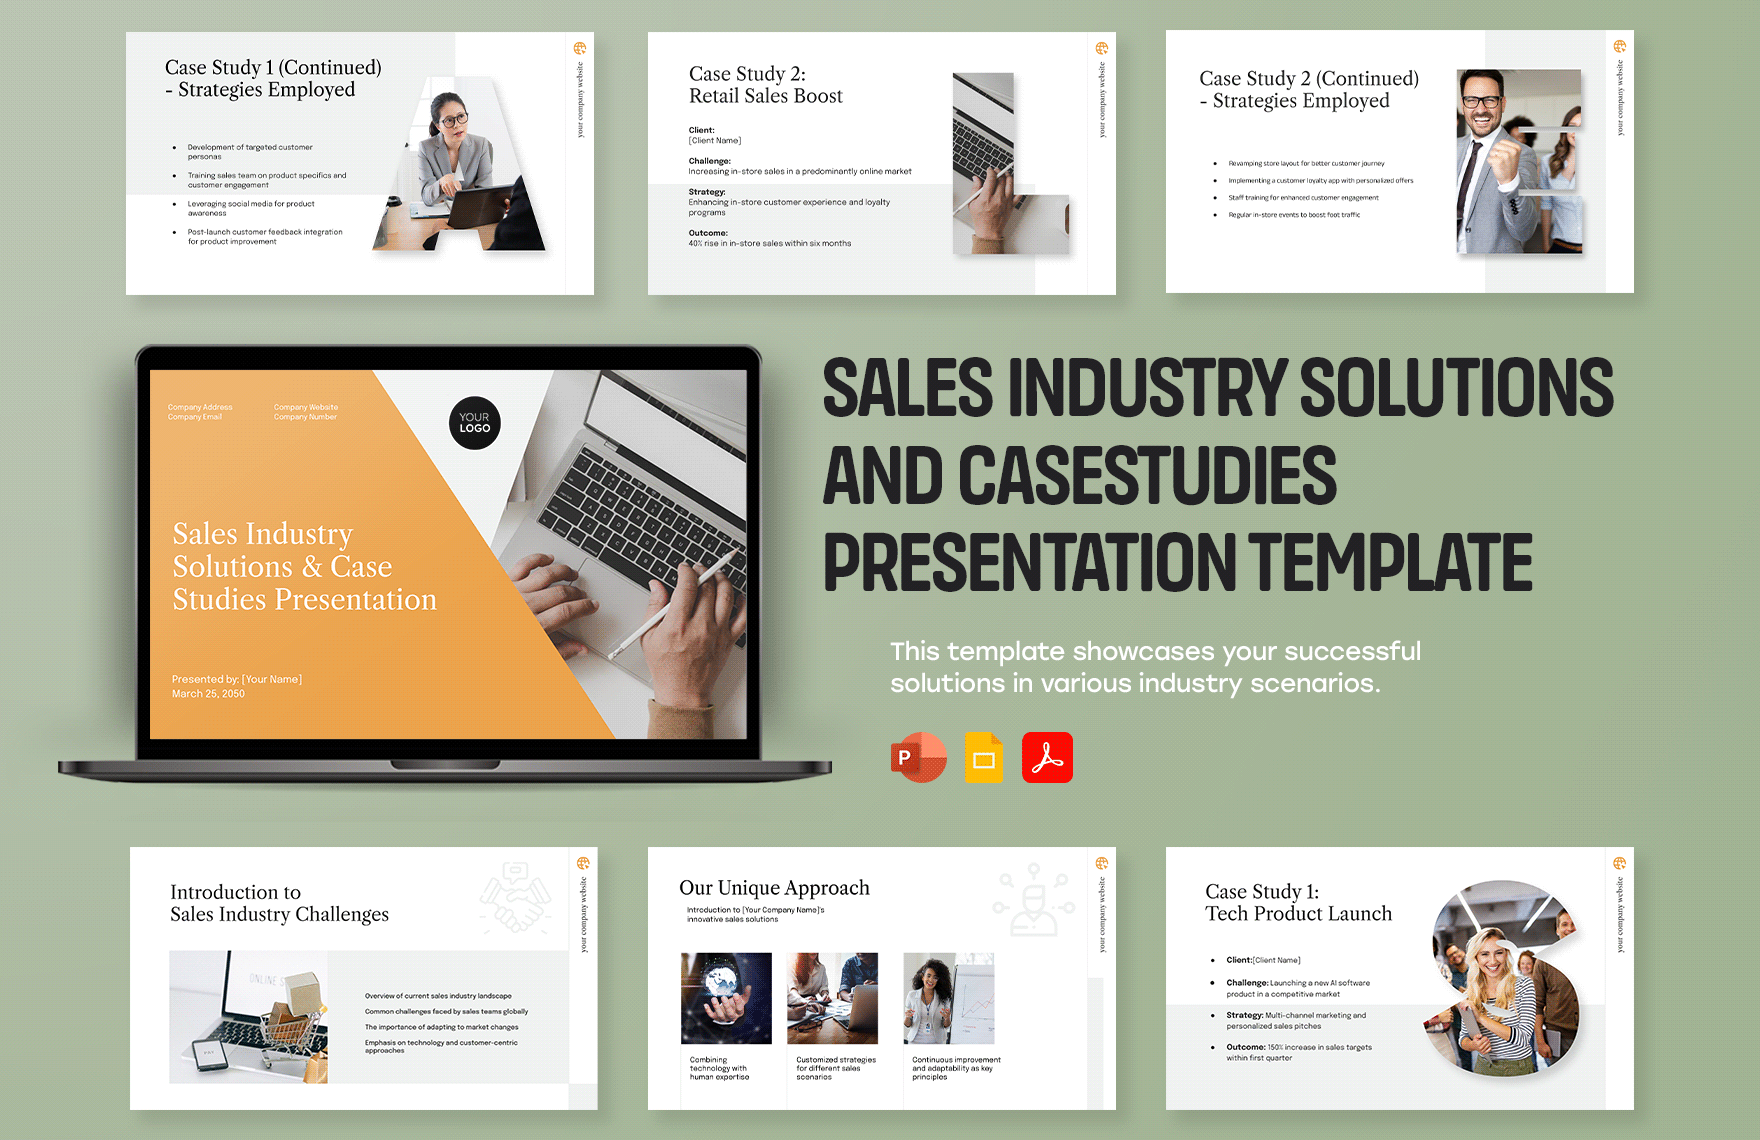 Sales Industry Solutions and Case Studies Presentation Template